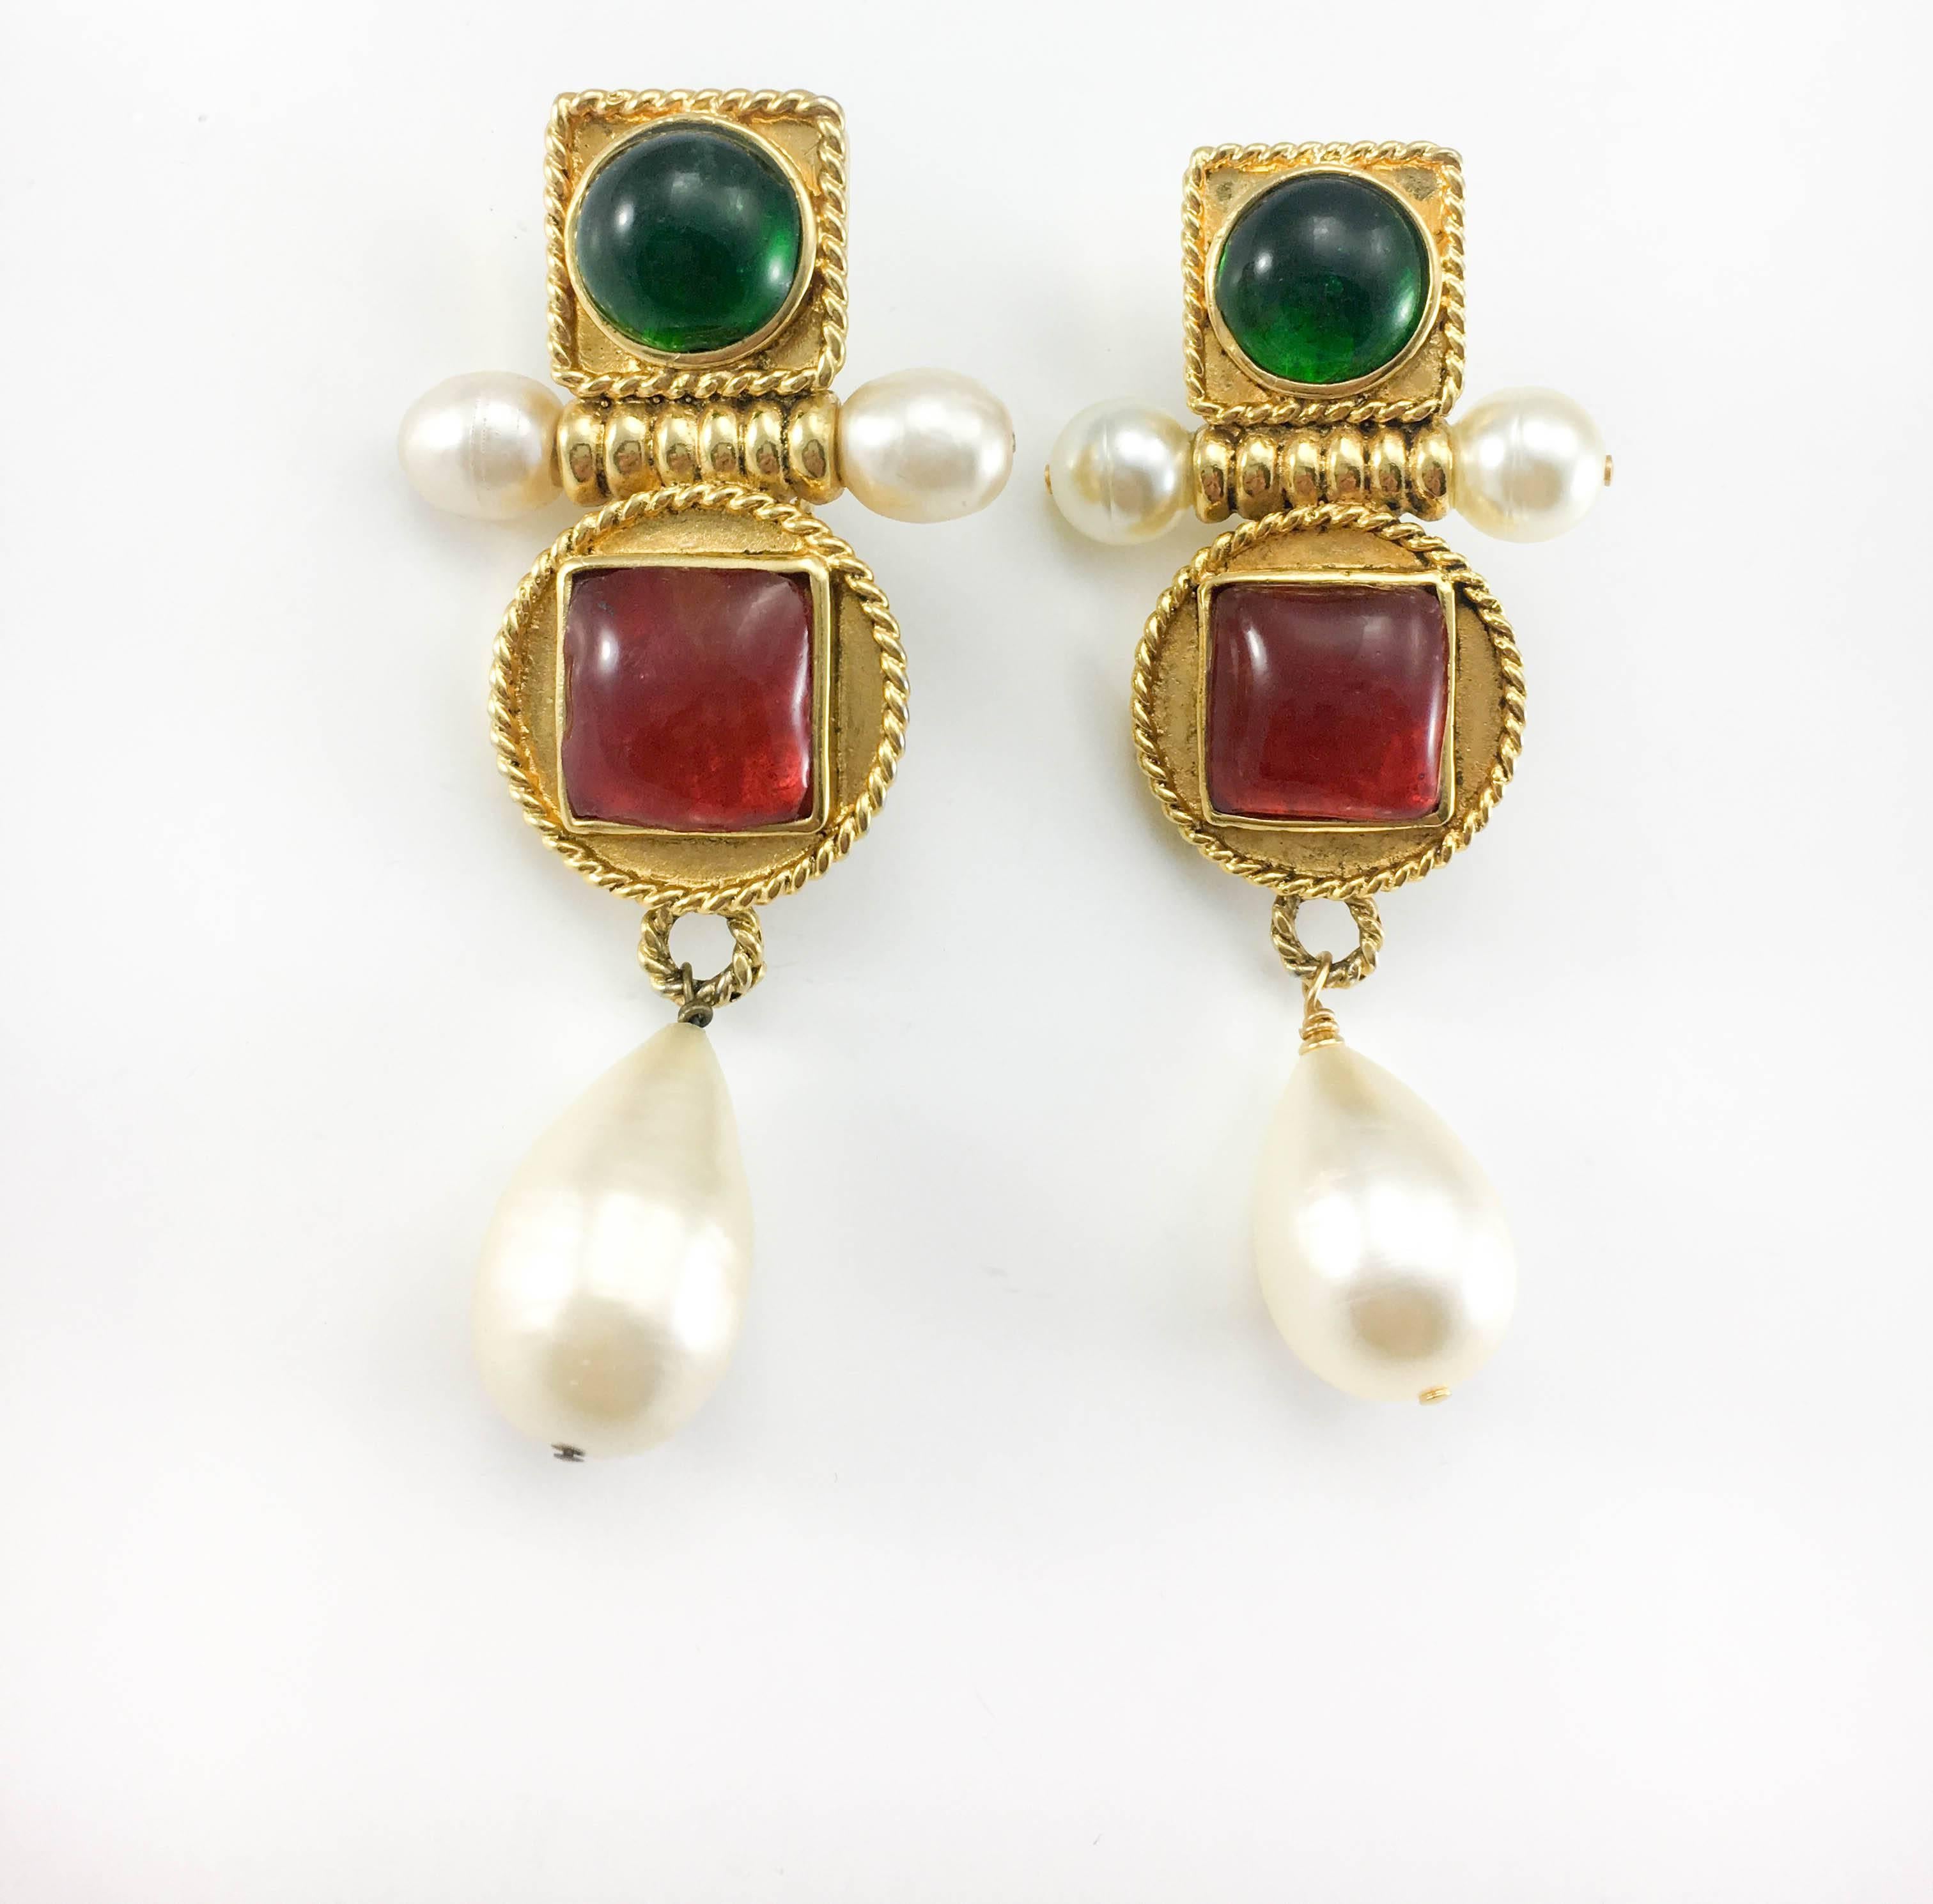 Vintage Chanel Faux Pearl and Red and Green Gripoix Clip-on Earrings. These fabulous large earrings by Chanel date back from the 1970’s. The gilt metal structure is embellished with red and green gripoix (poured glass), two pearls on the side and a